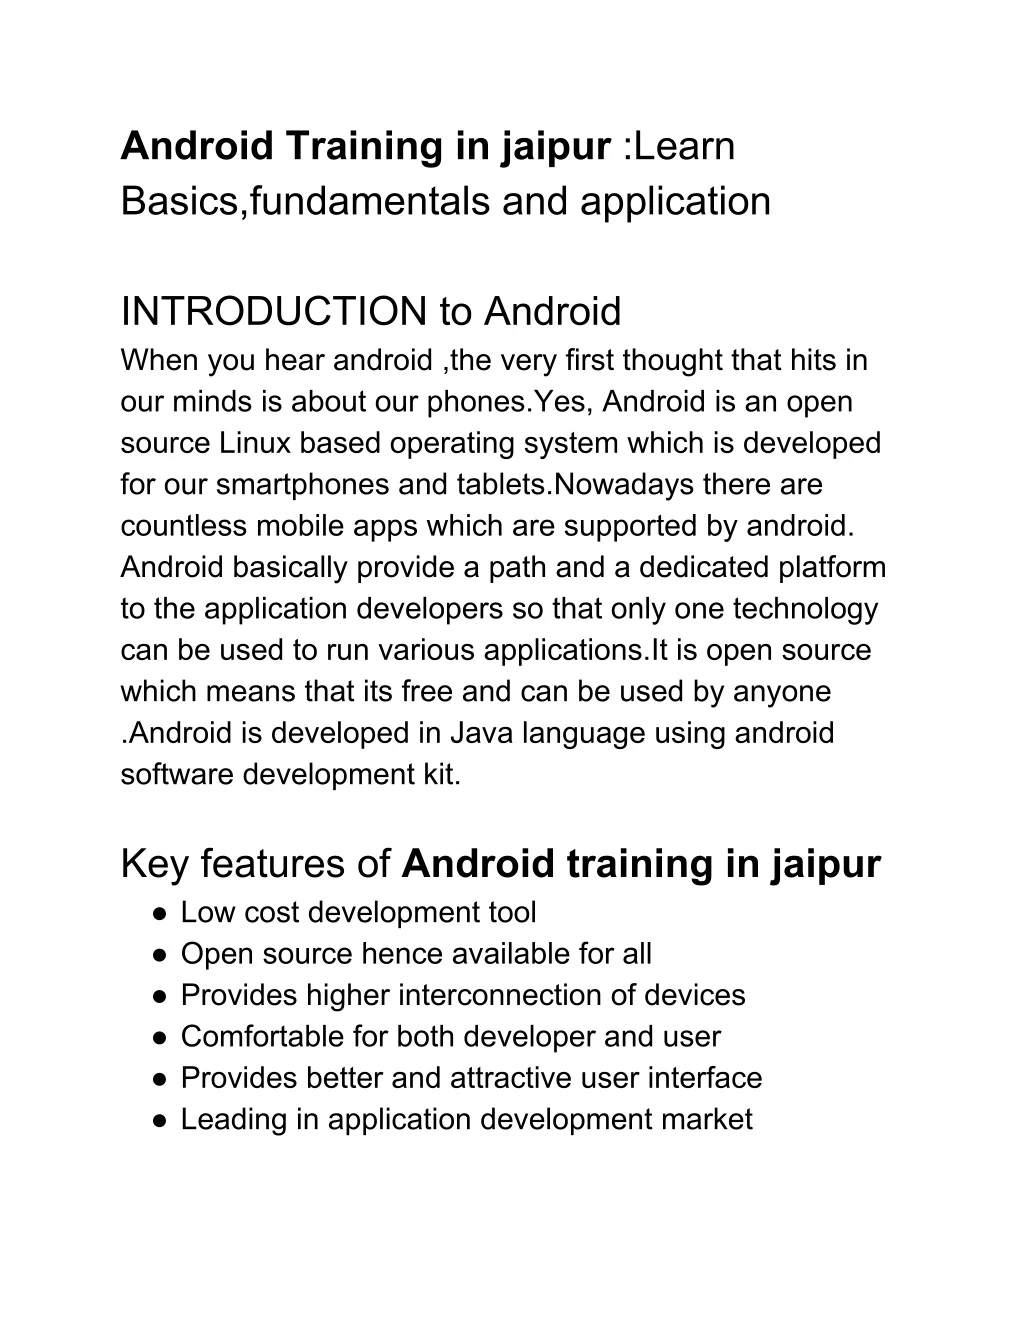 android training in jaipur learn basics